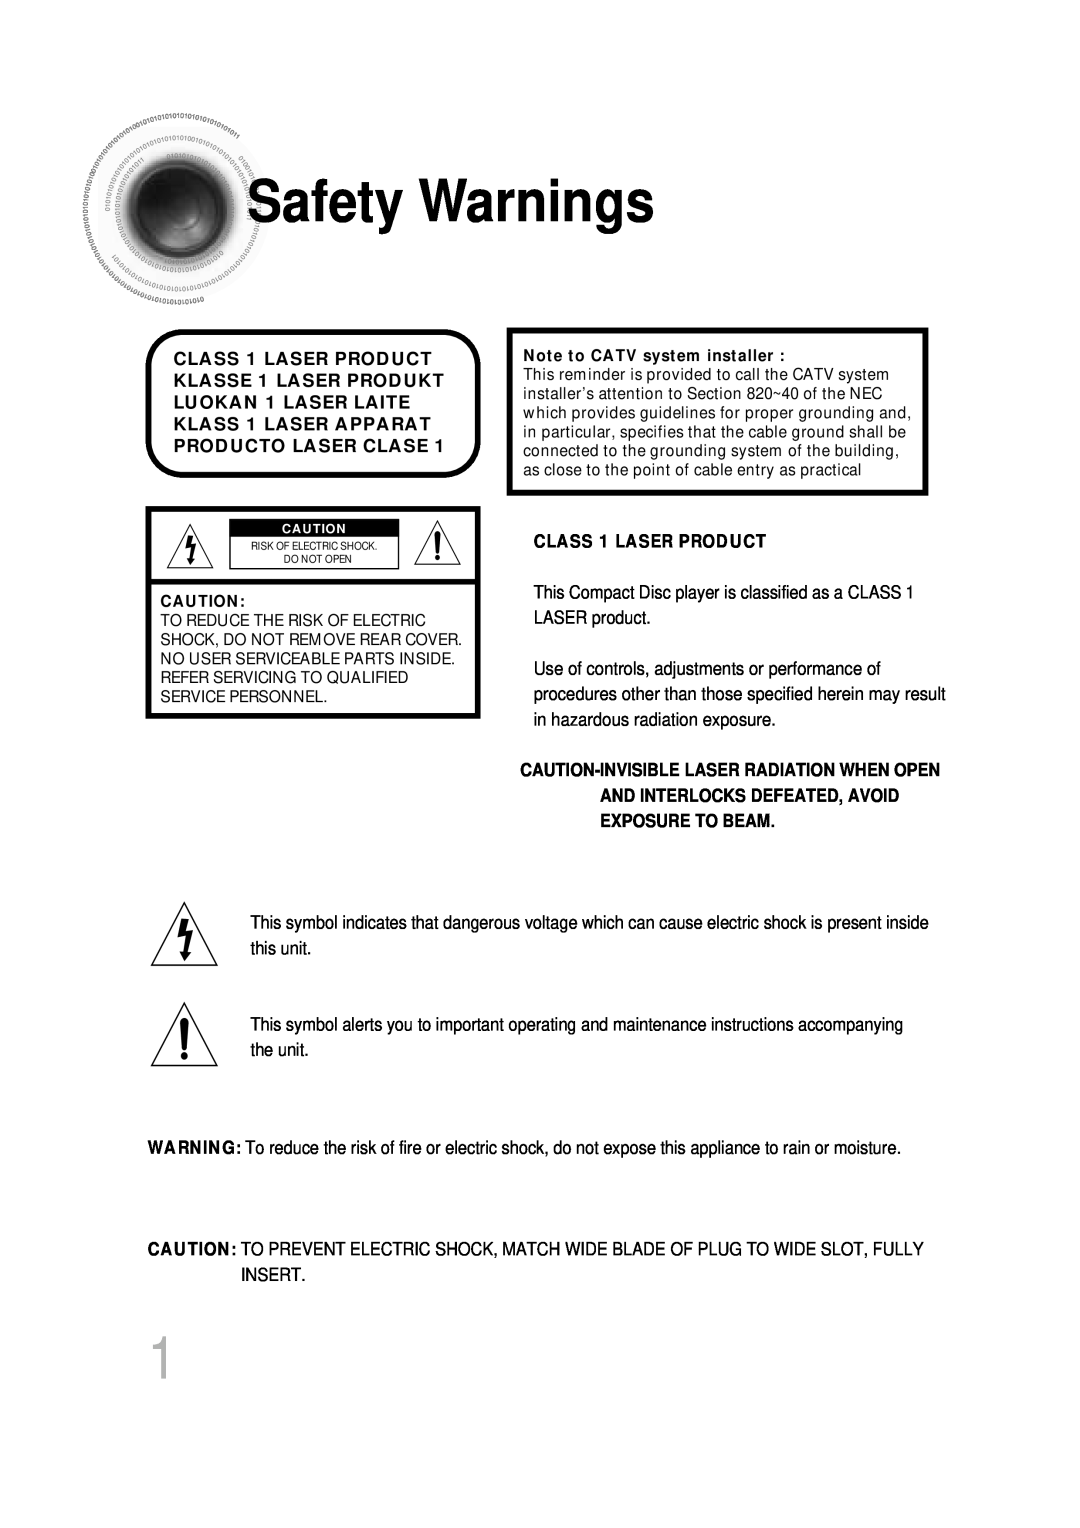 Samsung HT-DB600 instruction manual Safety Warnings, CLASS 1 LASER PRODUCT 